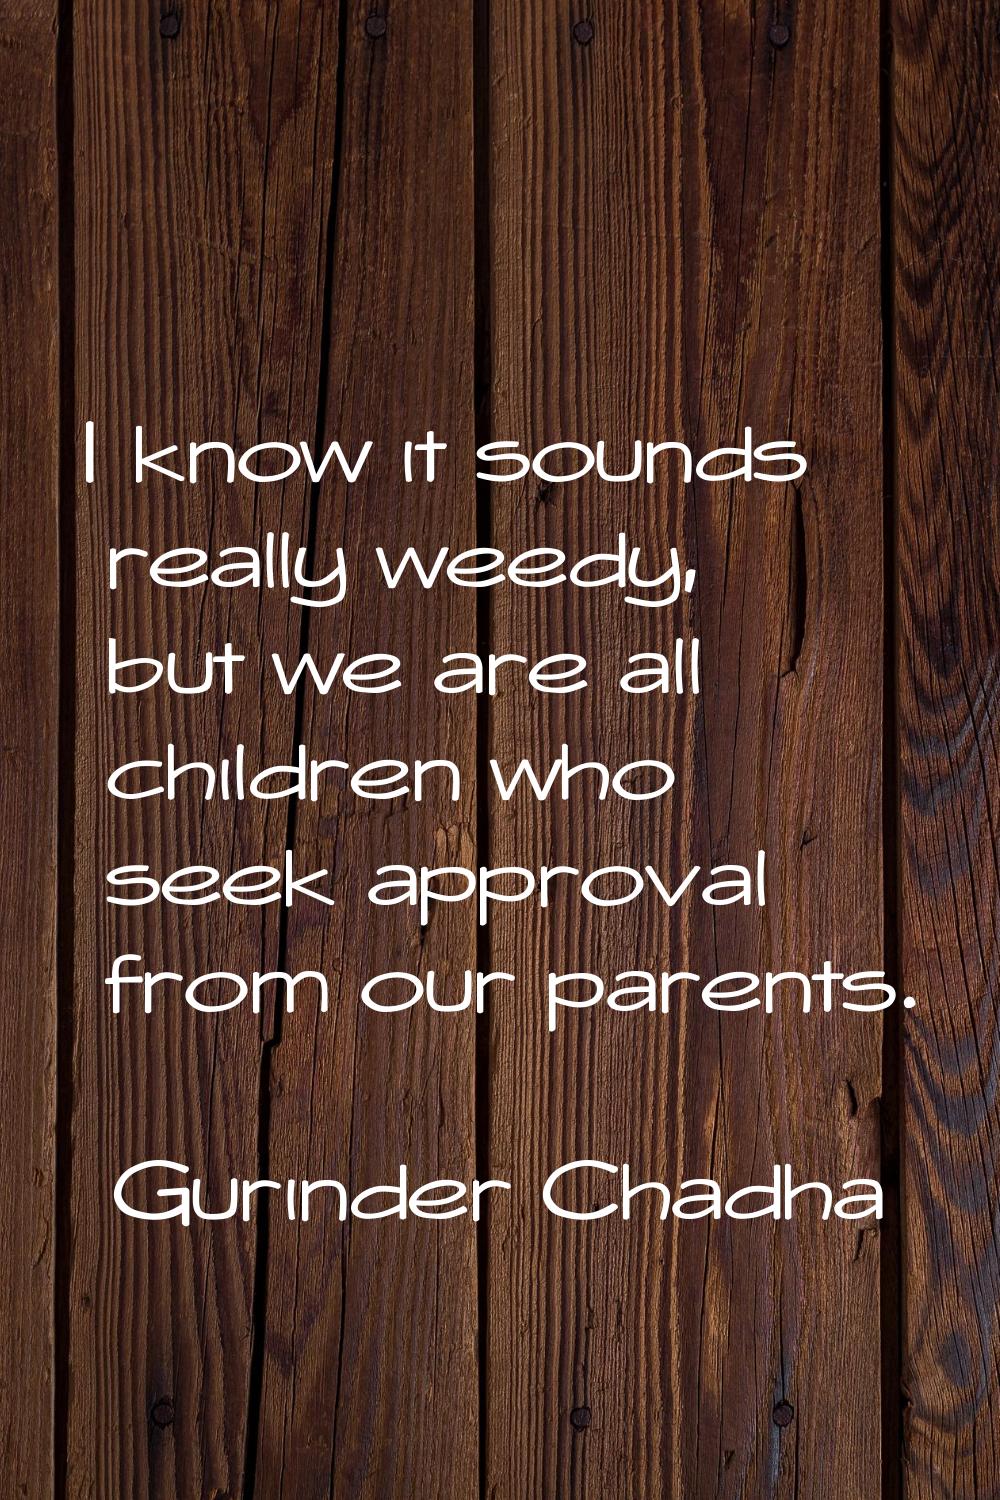 I know it sounds really weedy, but we are all children who seek approval from our parents.